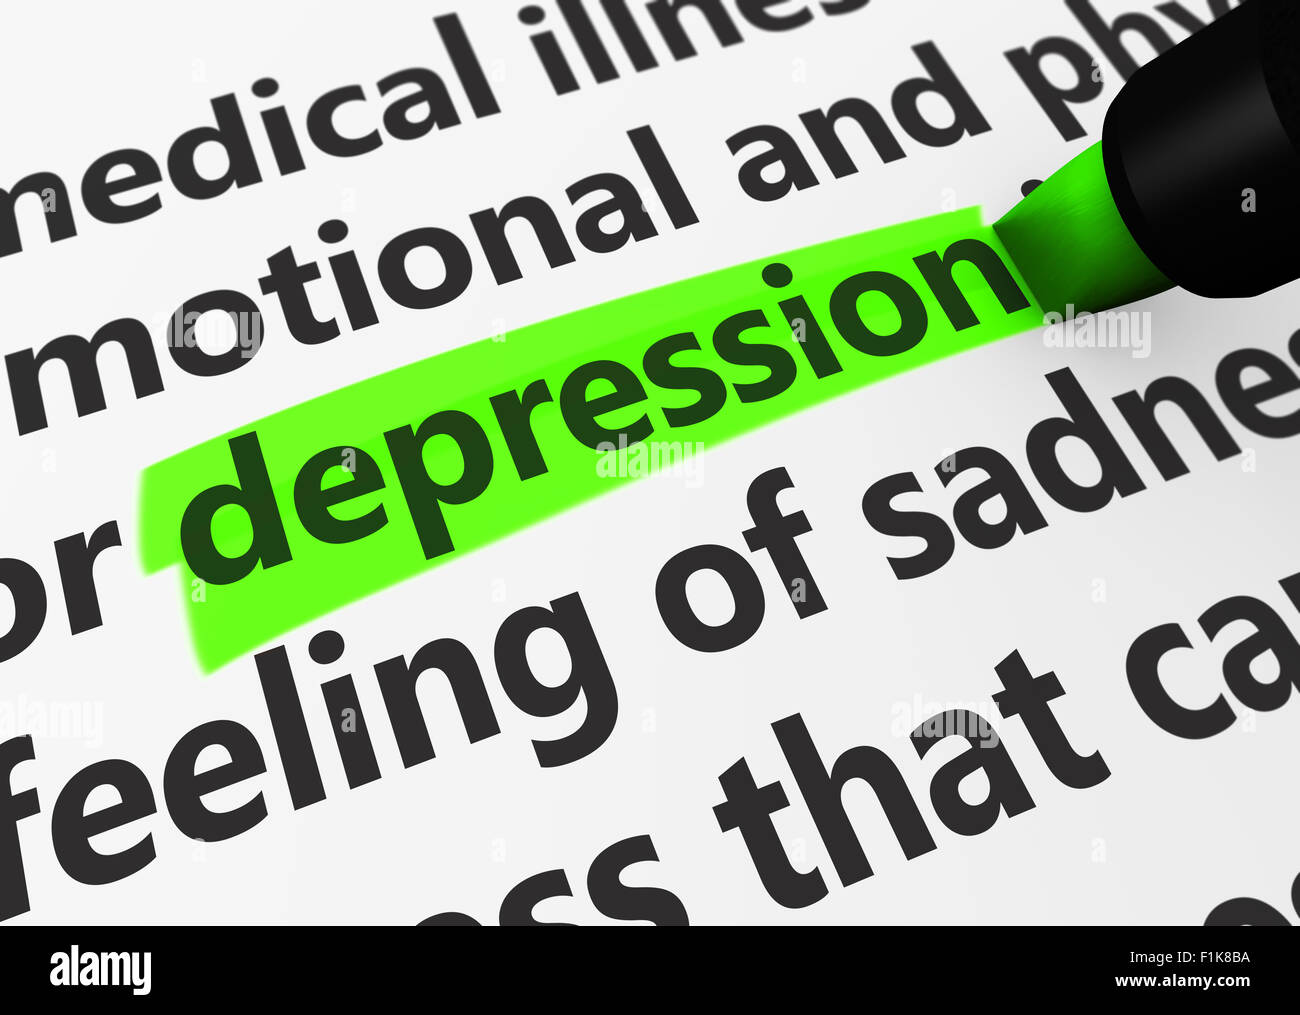 Health care, disease and illness concept with a close-up 3d render of depression word highlighted with a green marker. Stock Photo